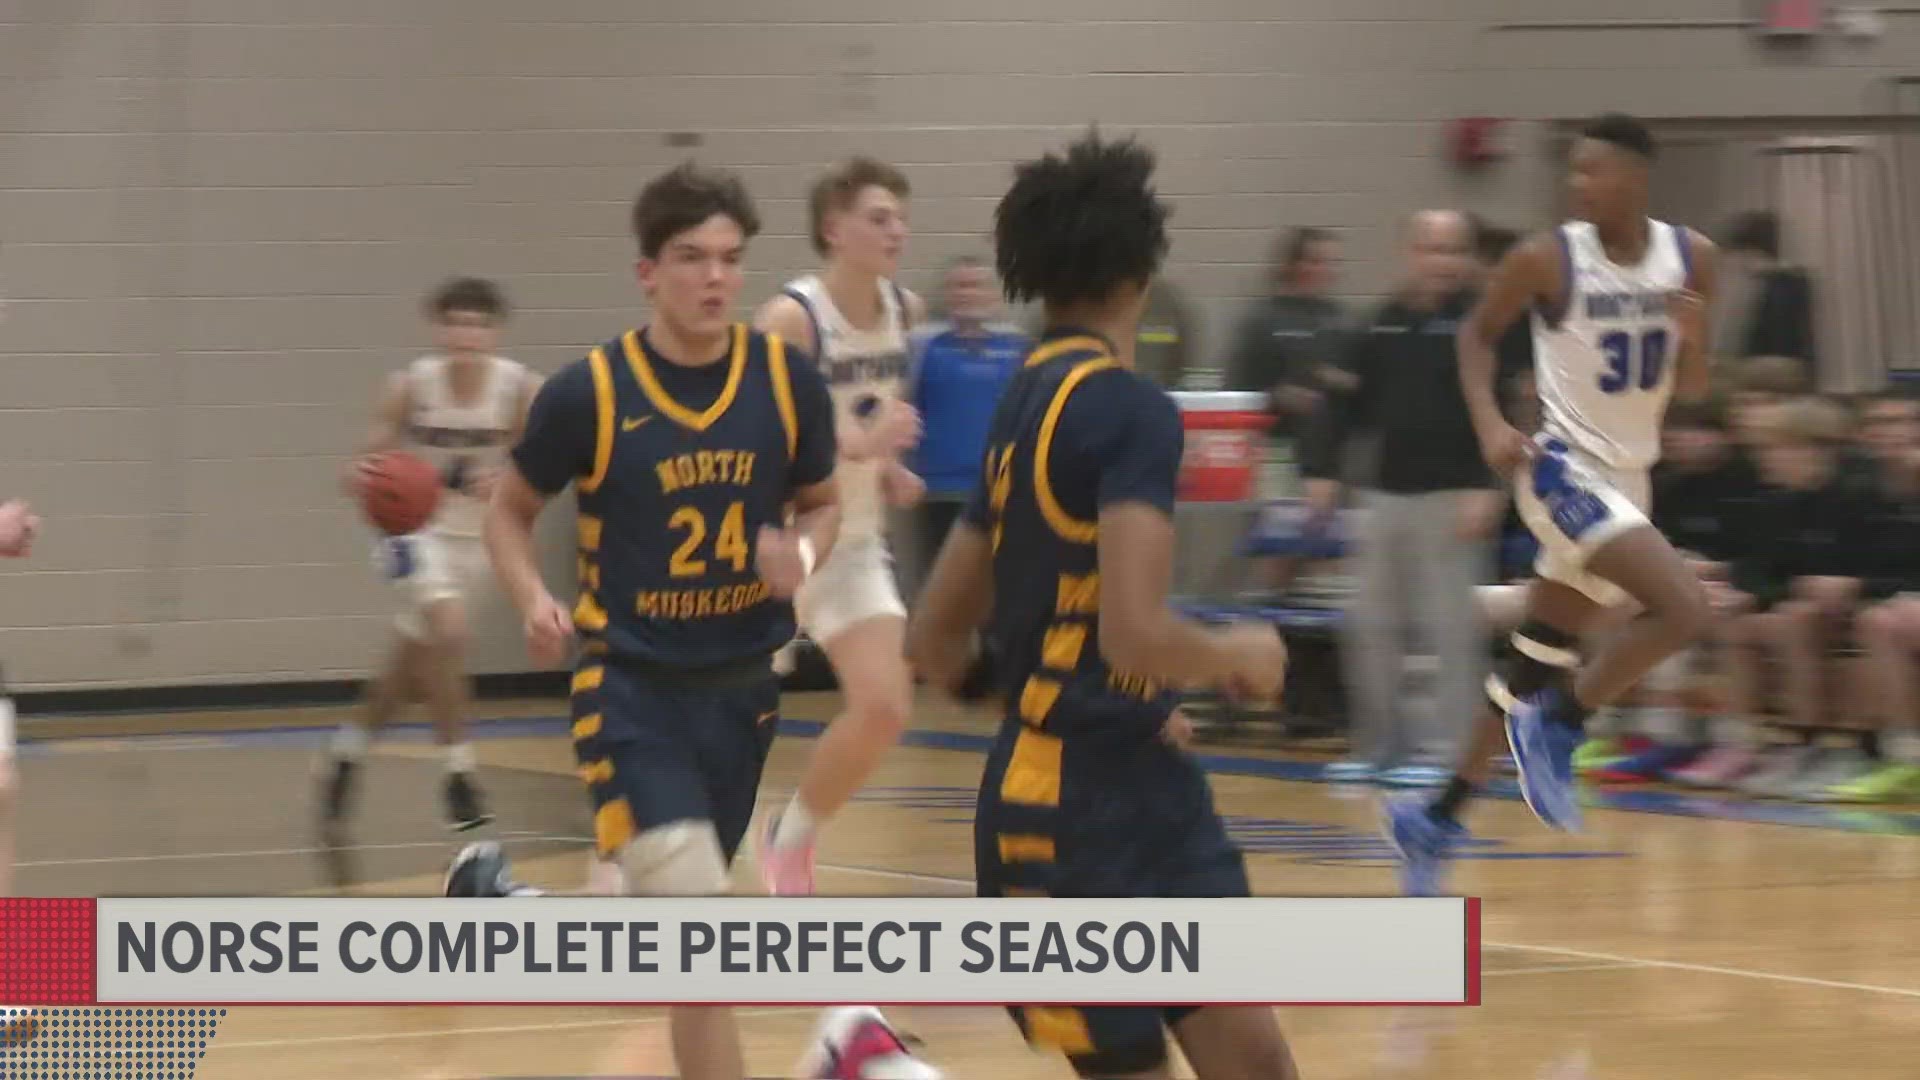 There's just one word needed to describe boys sports at North Muskegon High School — perfection.